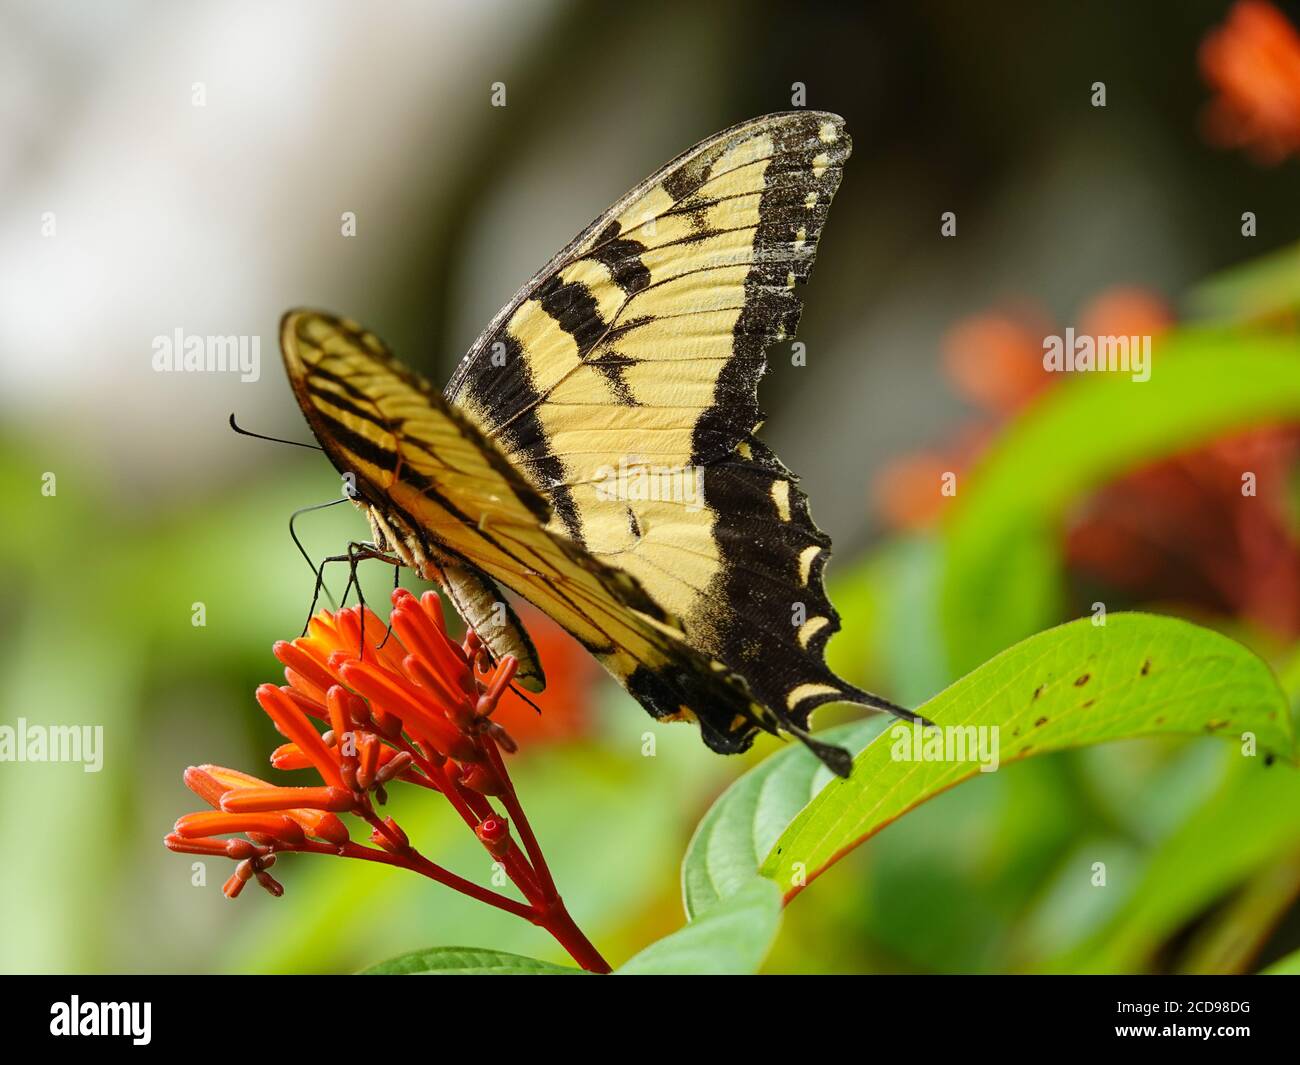 Eastern Tiger Swallowtail butterfly feeding on nectar from a flowering firebush plant, Alachua, County, Florida, USA. Stock Photo